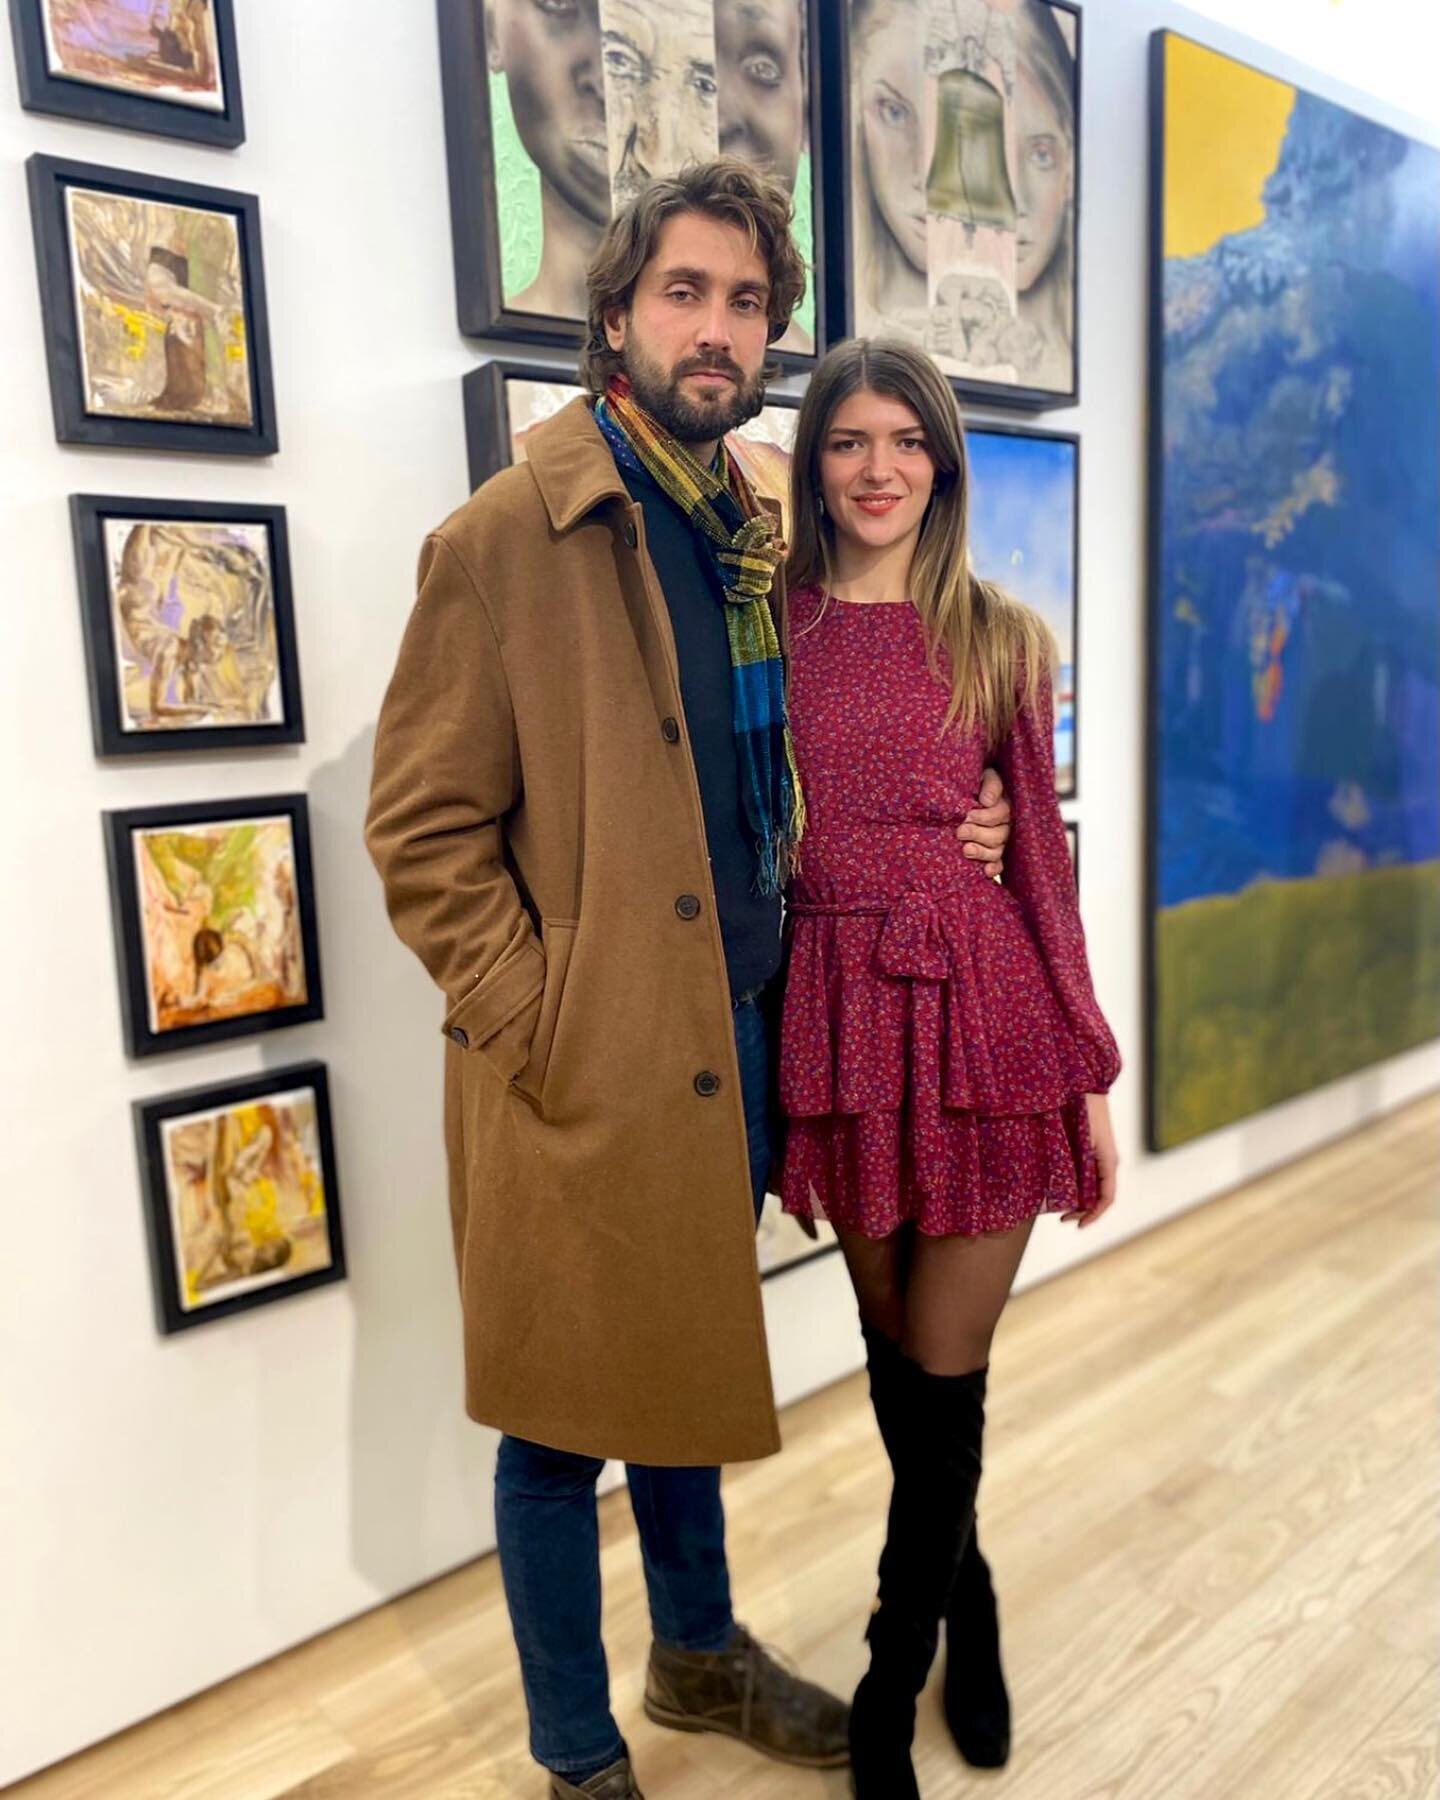 With @lautarooo at the opening of FICCIONES at @kismithgallery 

The show will be up until January 3rd at 311 E 3rd St in Manhattan 🙌🏻